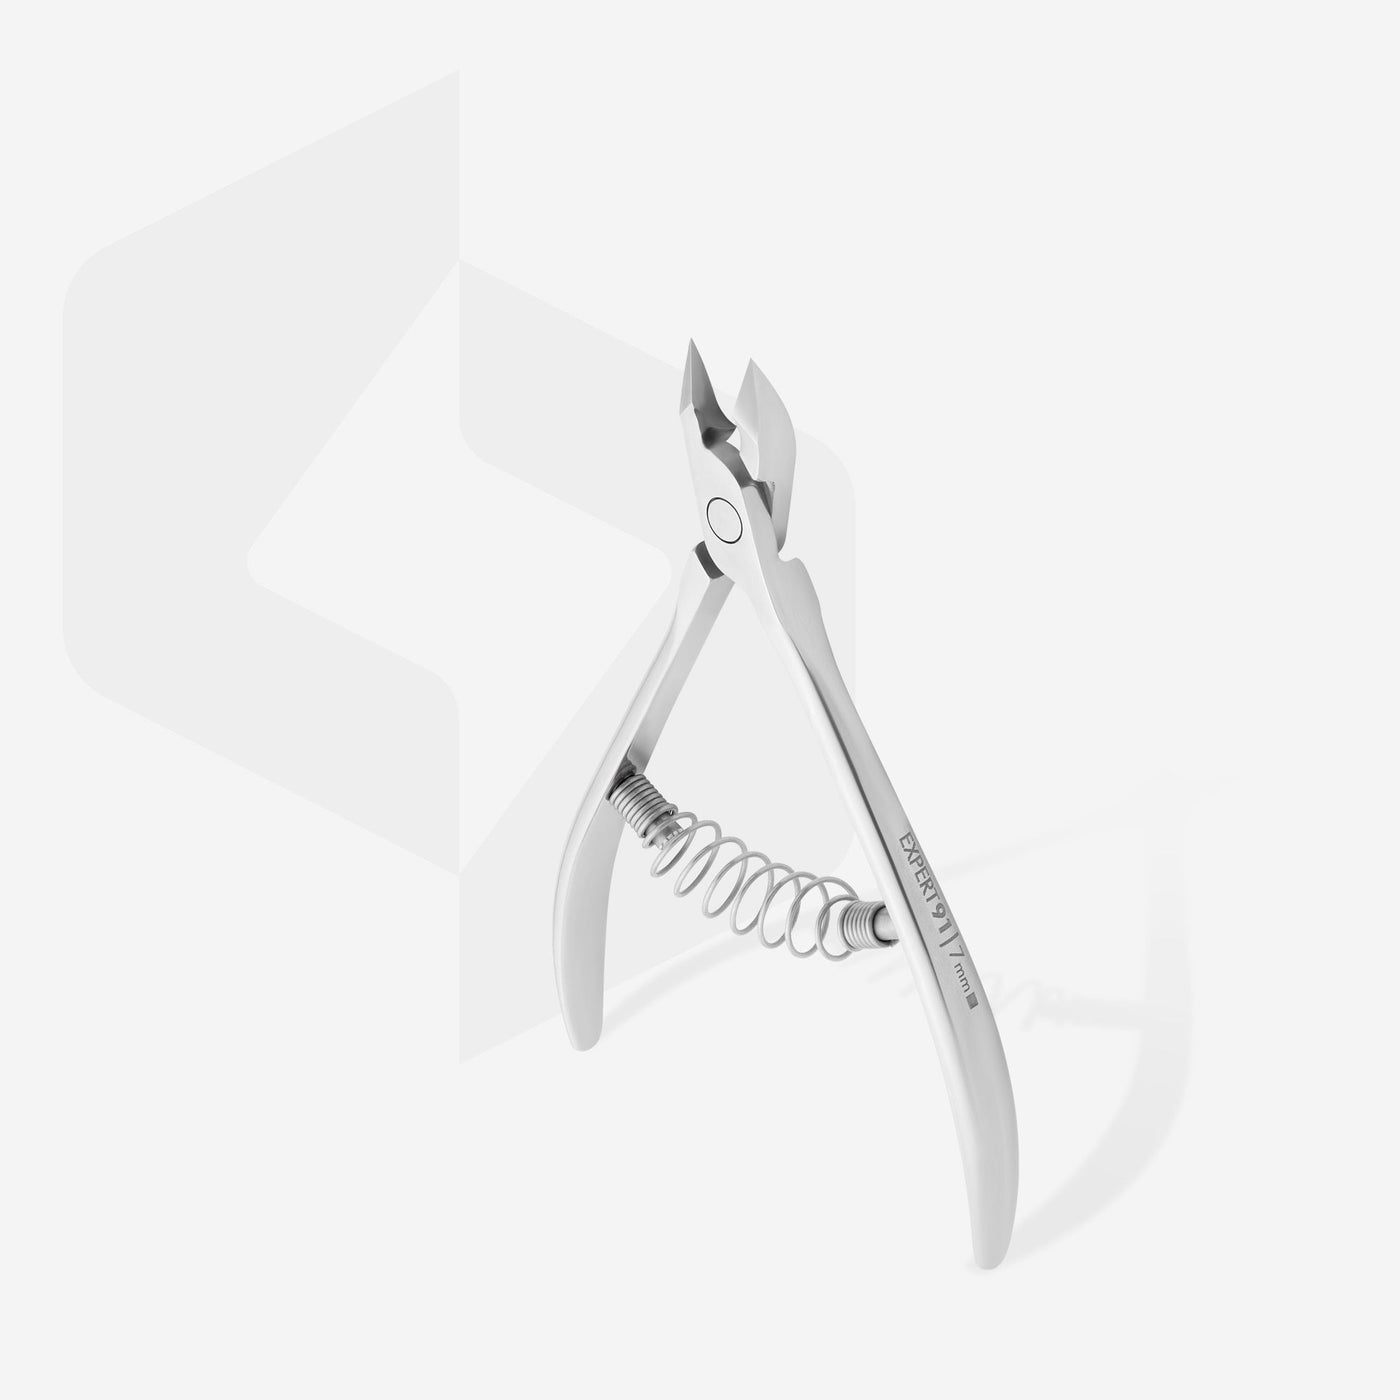 EXPERT 91 | 7 mm - Cuticle Nippers